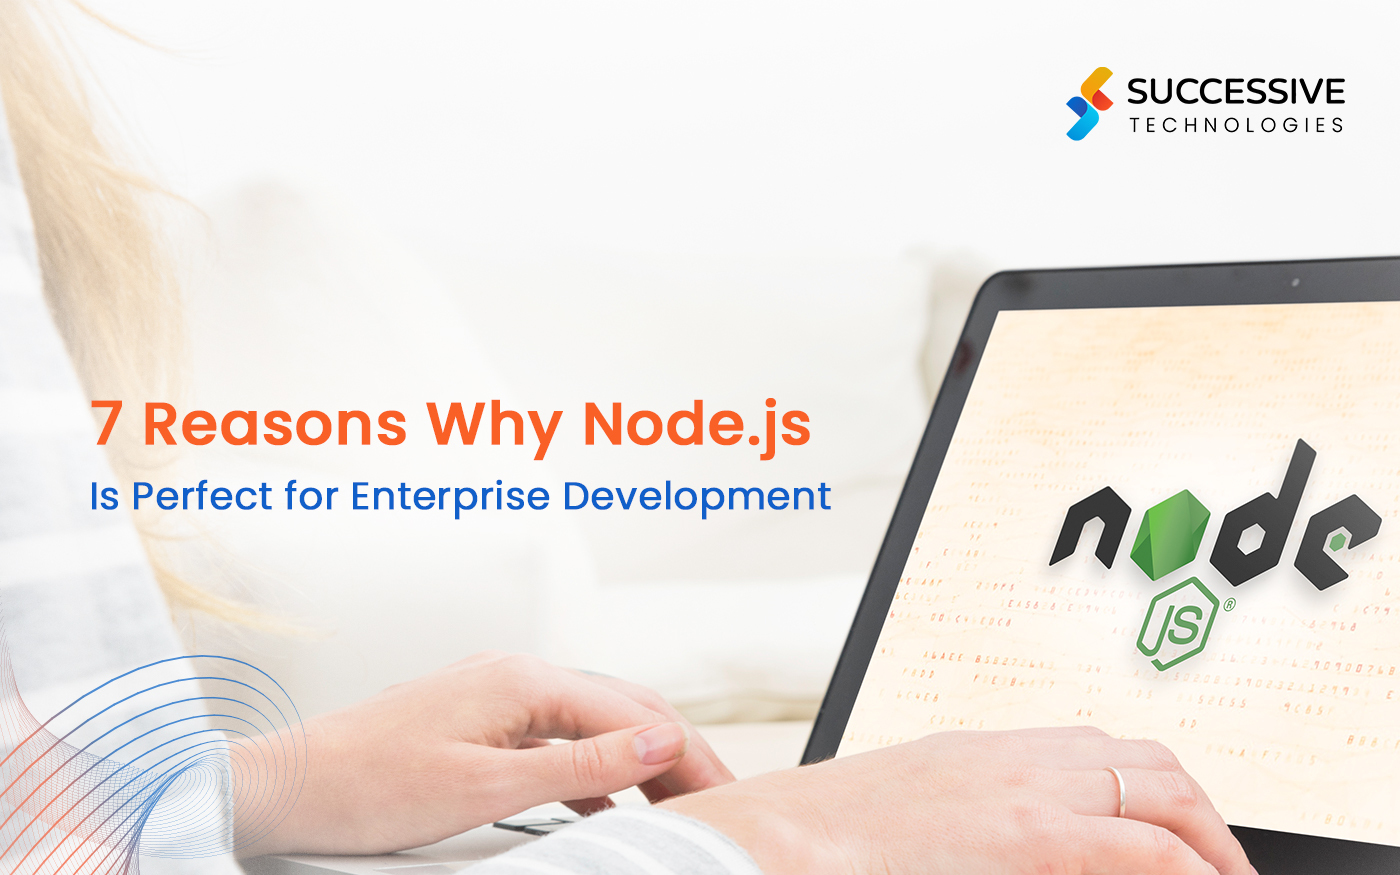 7 Reasons Why Node.js Is Perfect for Enterprise Development